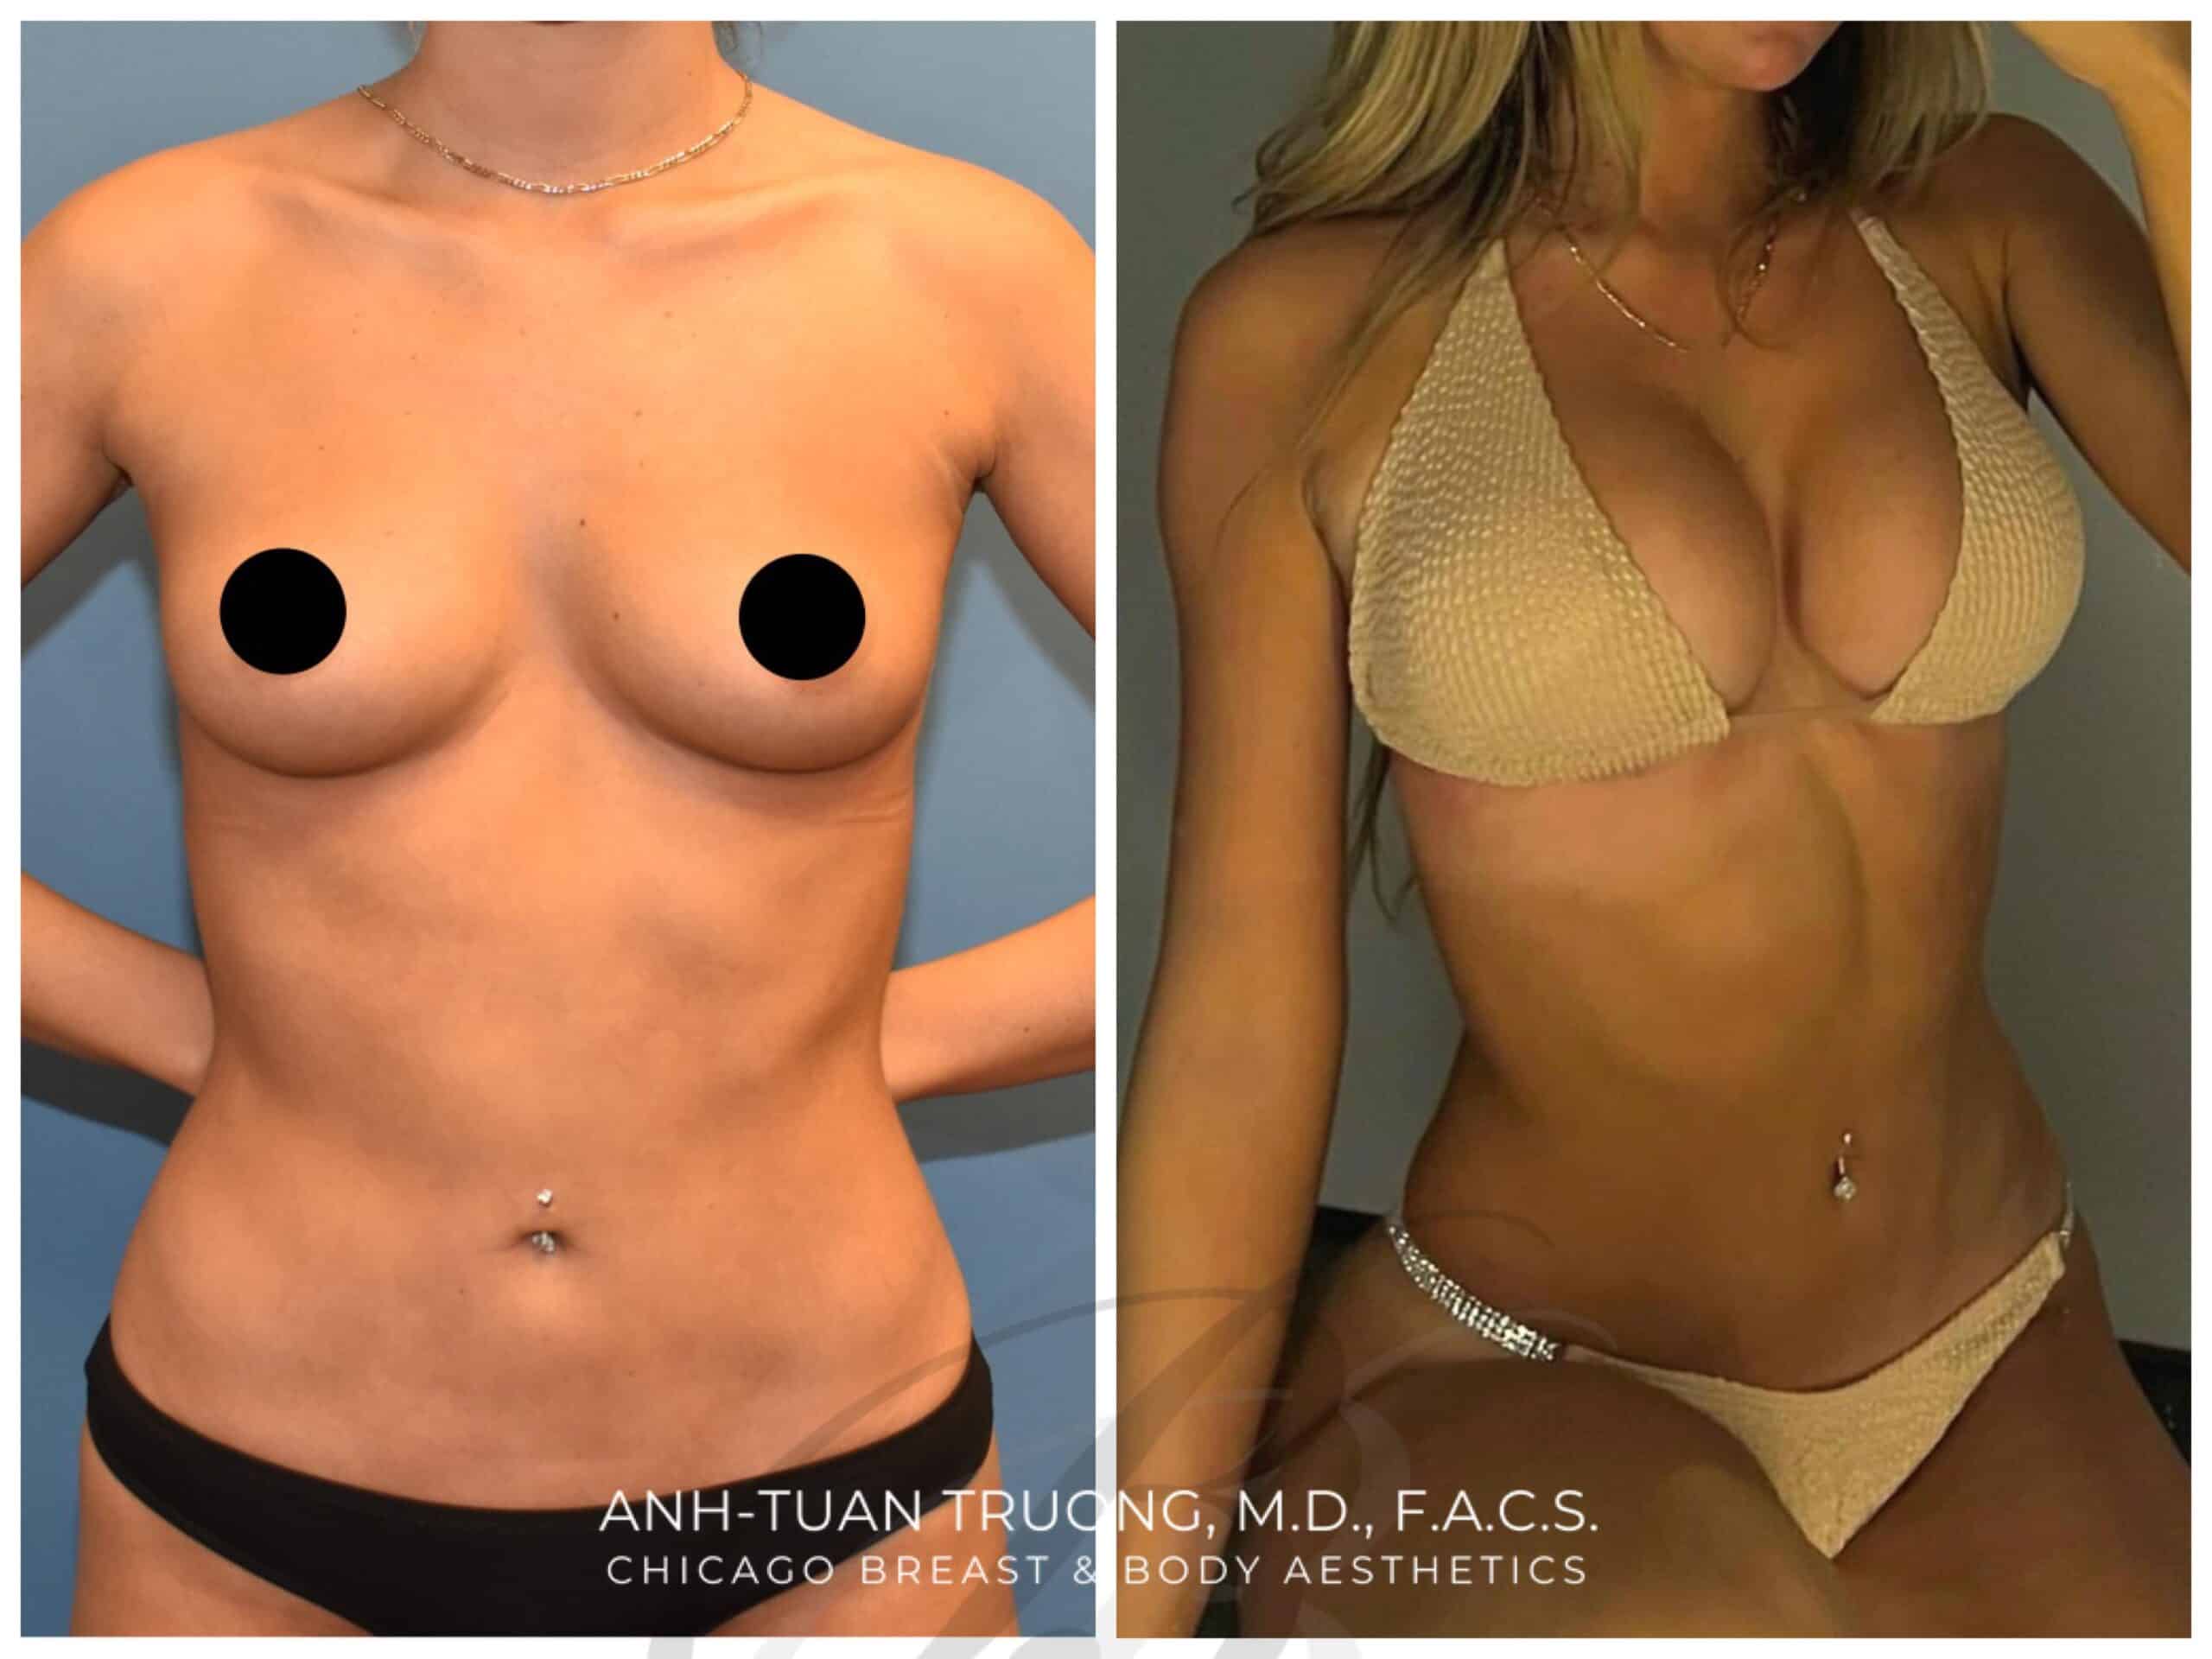 Dr. Anh Tuan Truong Reviews Chicago Breast & Body